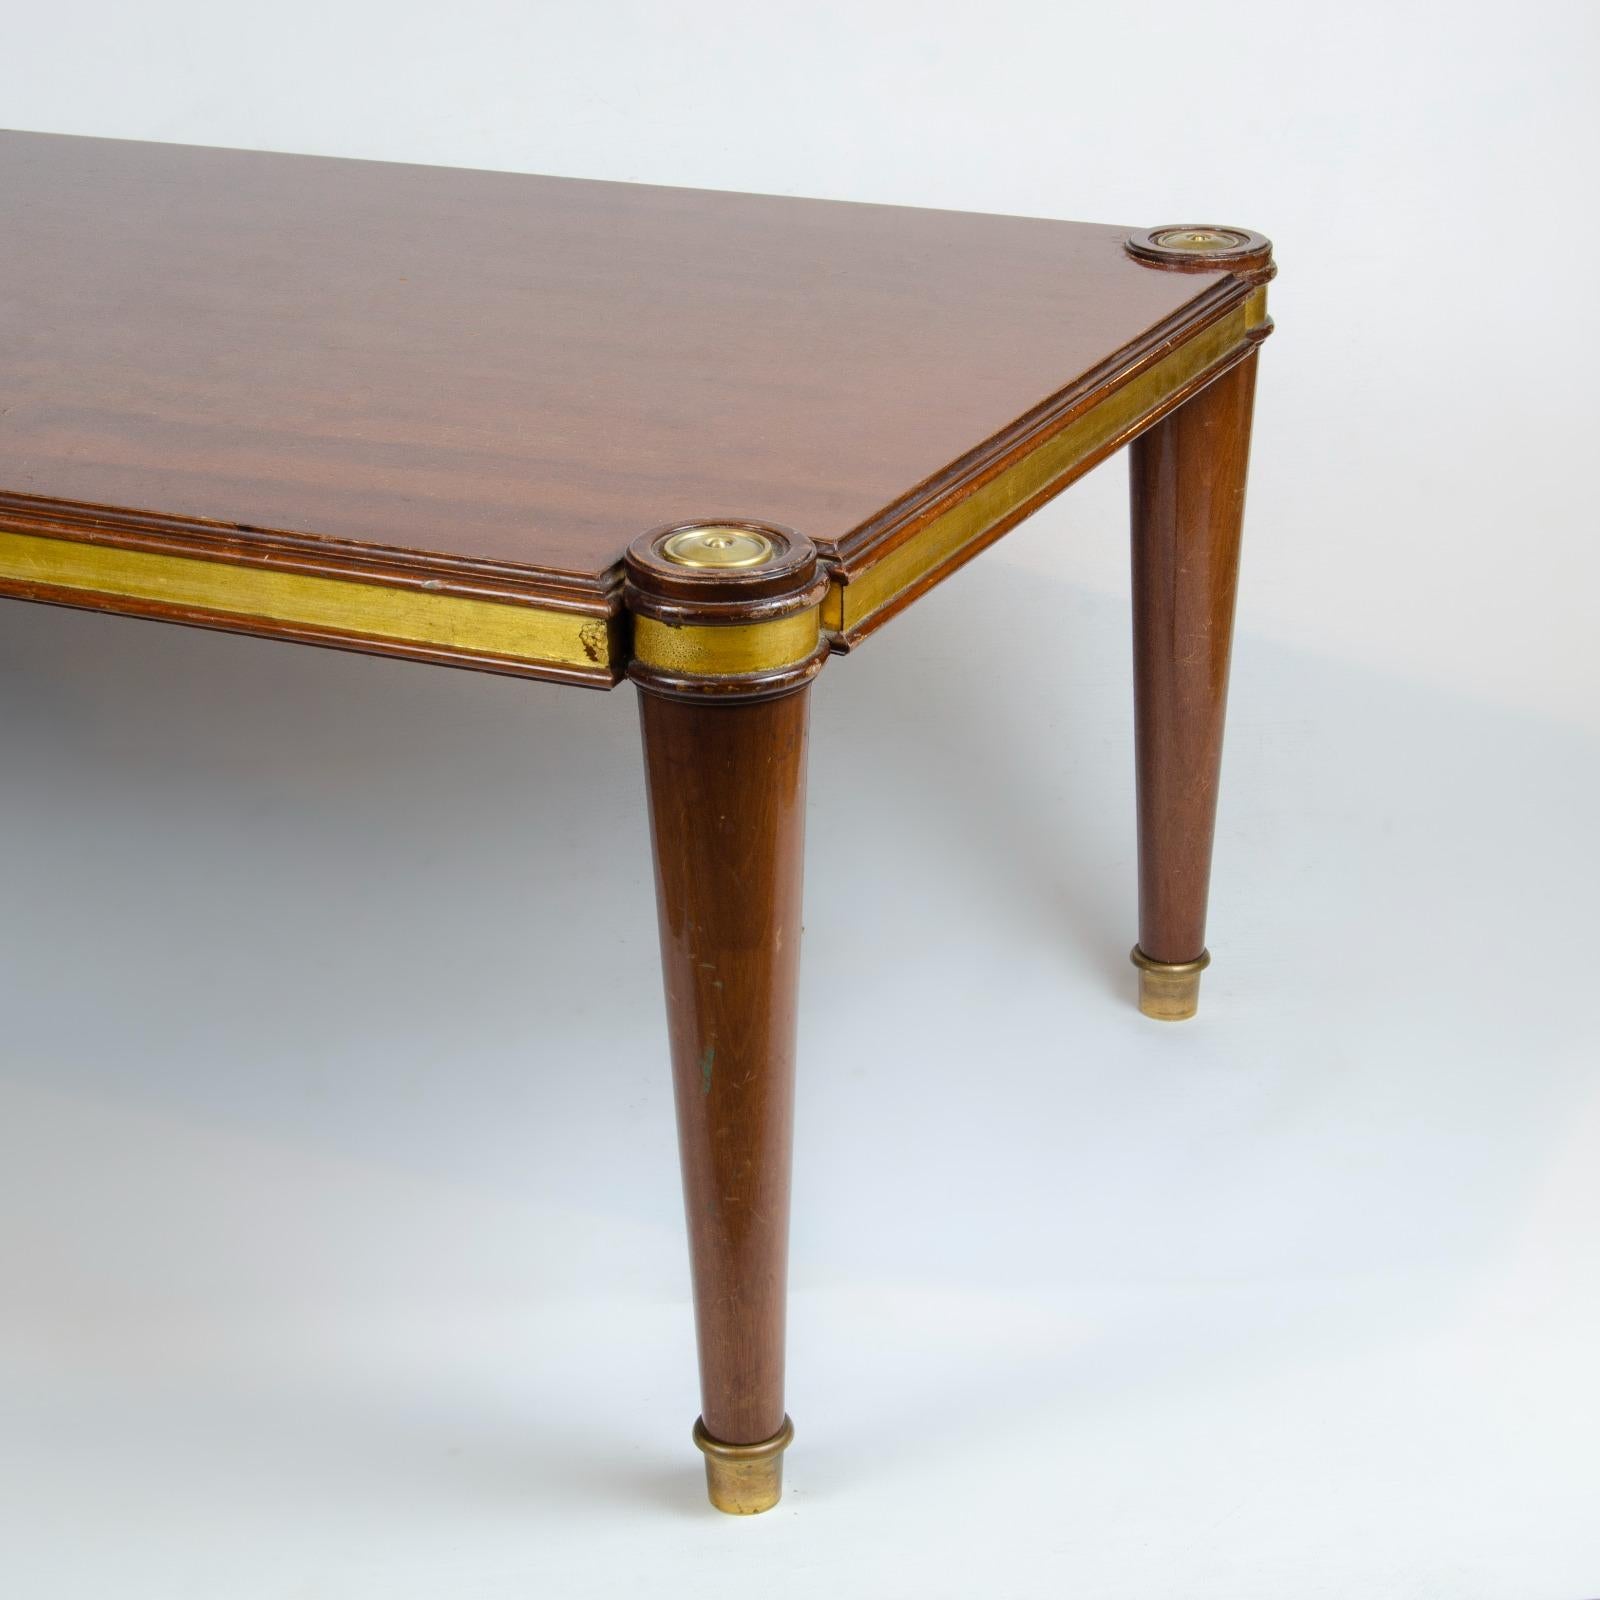 This French Art Deco coffee table is from Maison Jansen. The 1940s table is constructed of stained oak with gold leaf collars above the leg. The table bed has a decorative 1940s design and feet are brass tipped.
